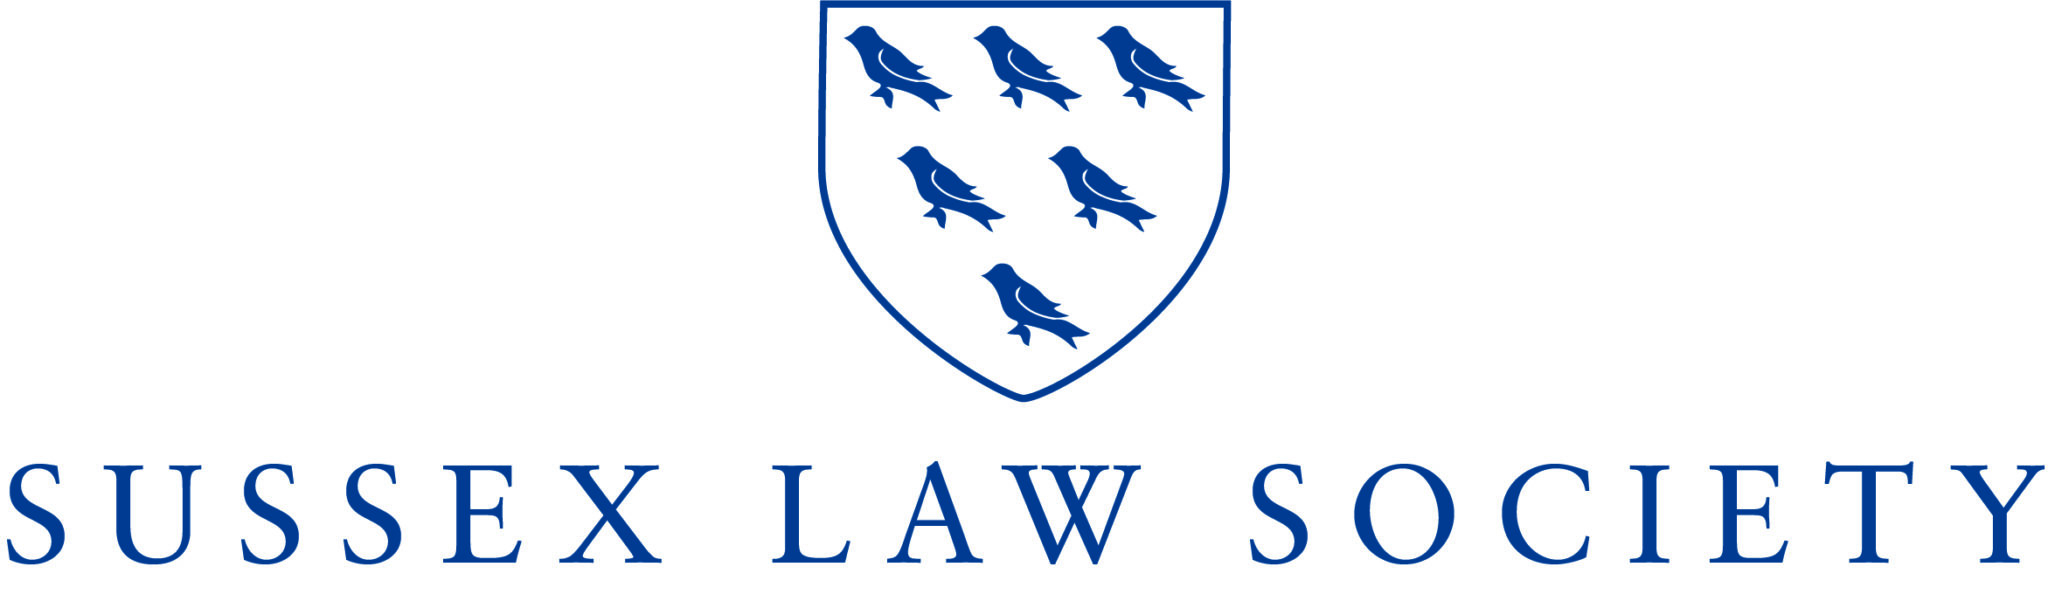 Sussex Law